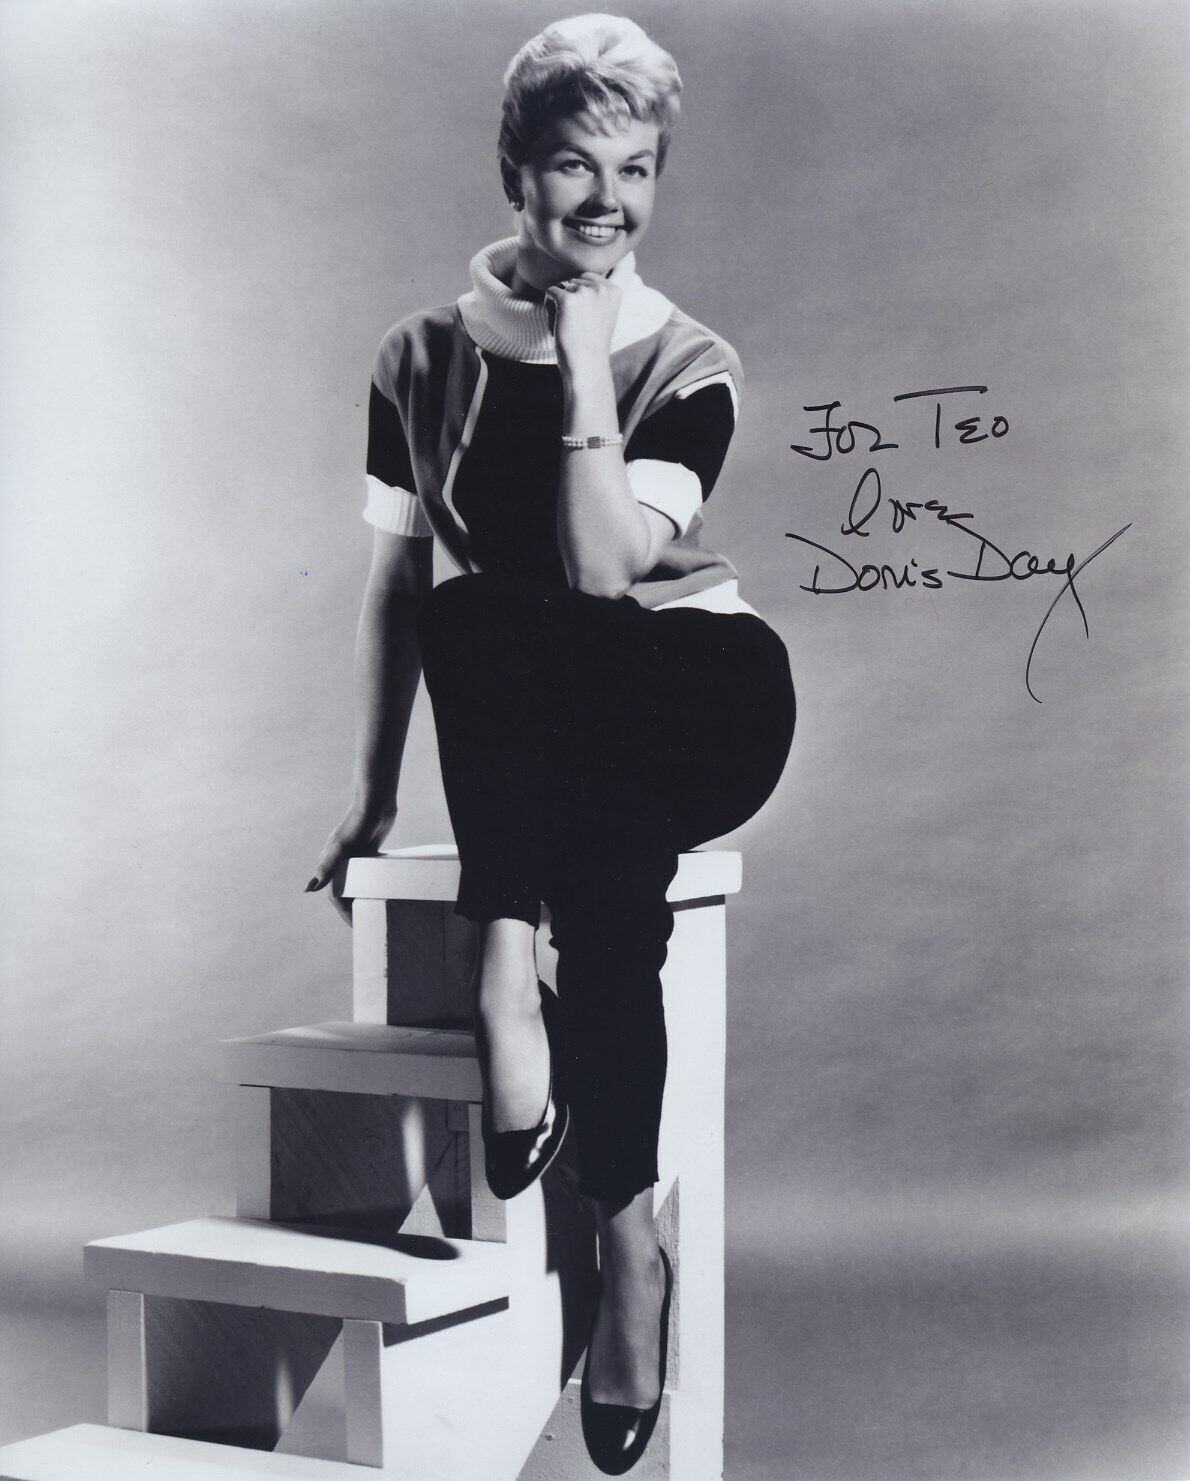 DORIS DAY SIGNED AUTOGRAPHED 8x10 Photo Poster painting JSA SPENCE STICKER COA FOR TEO